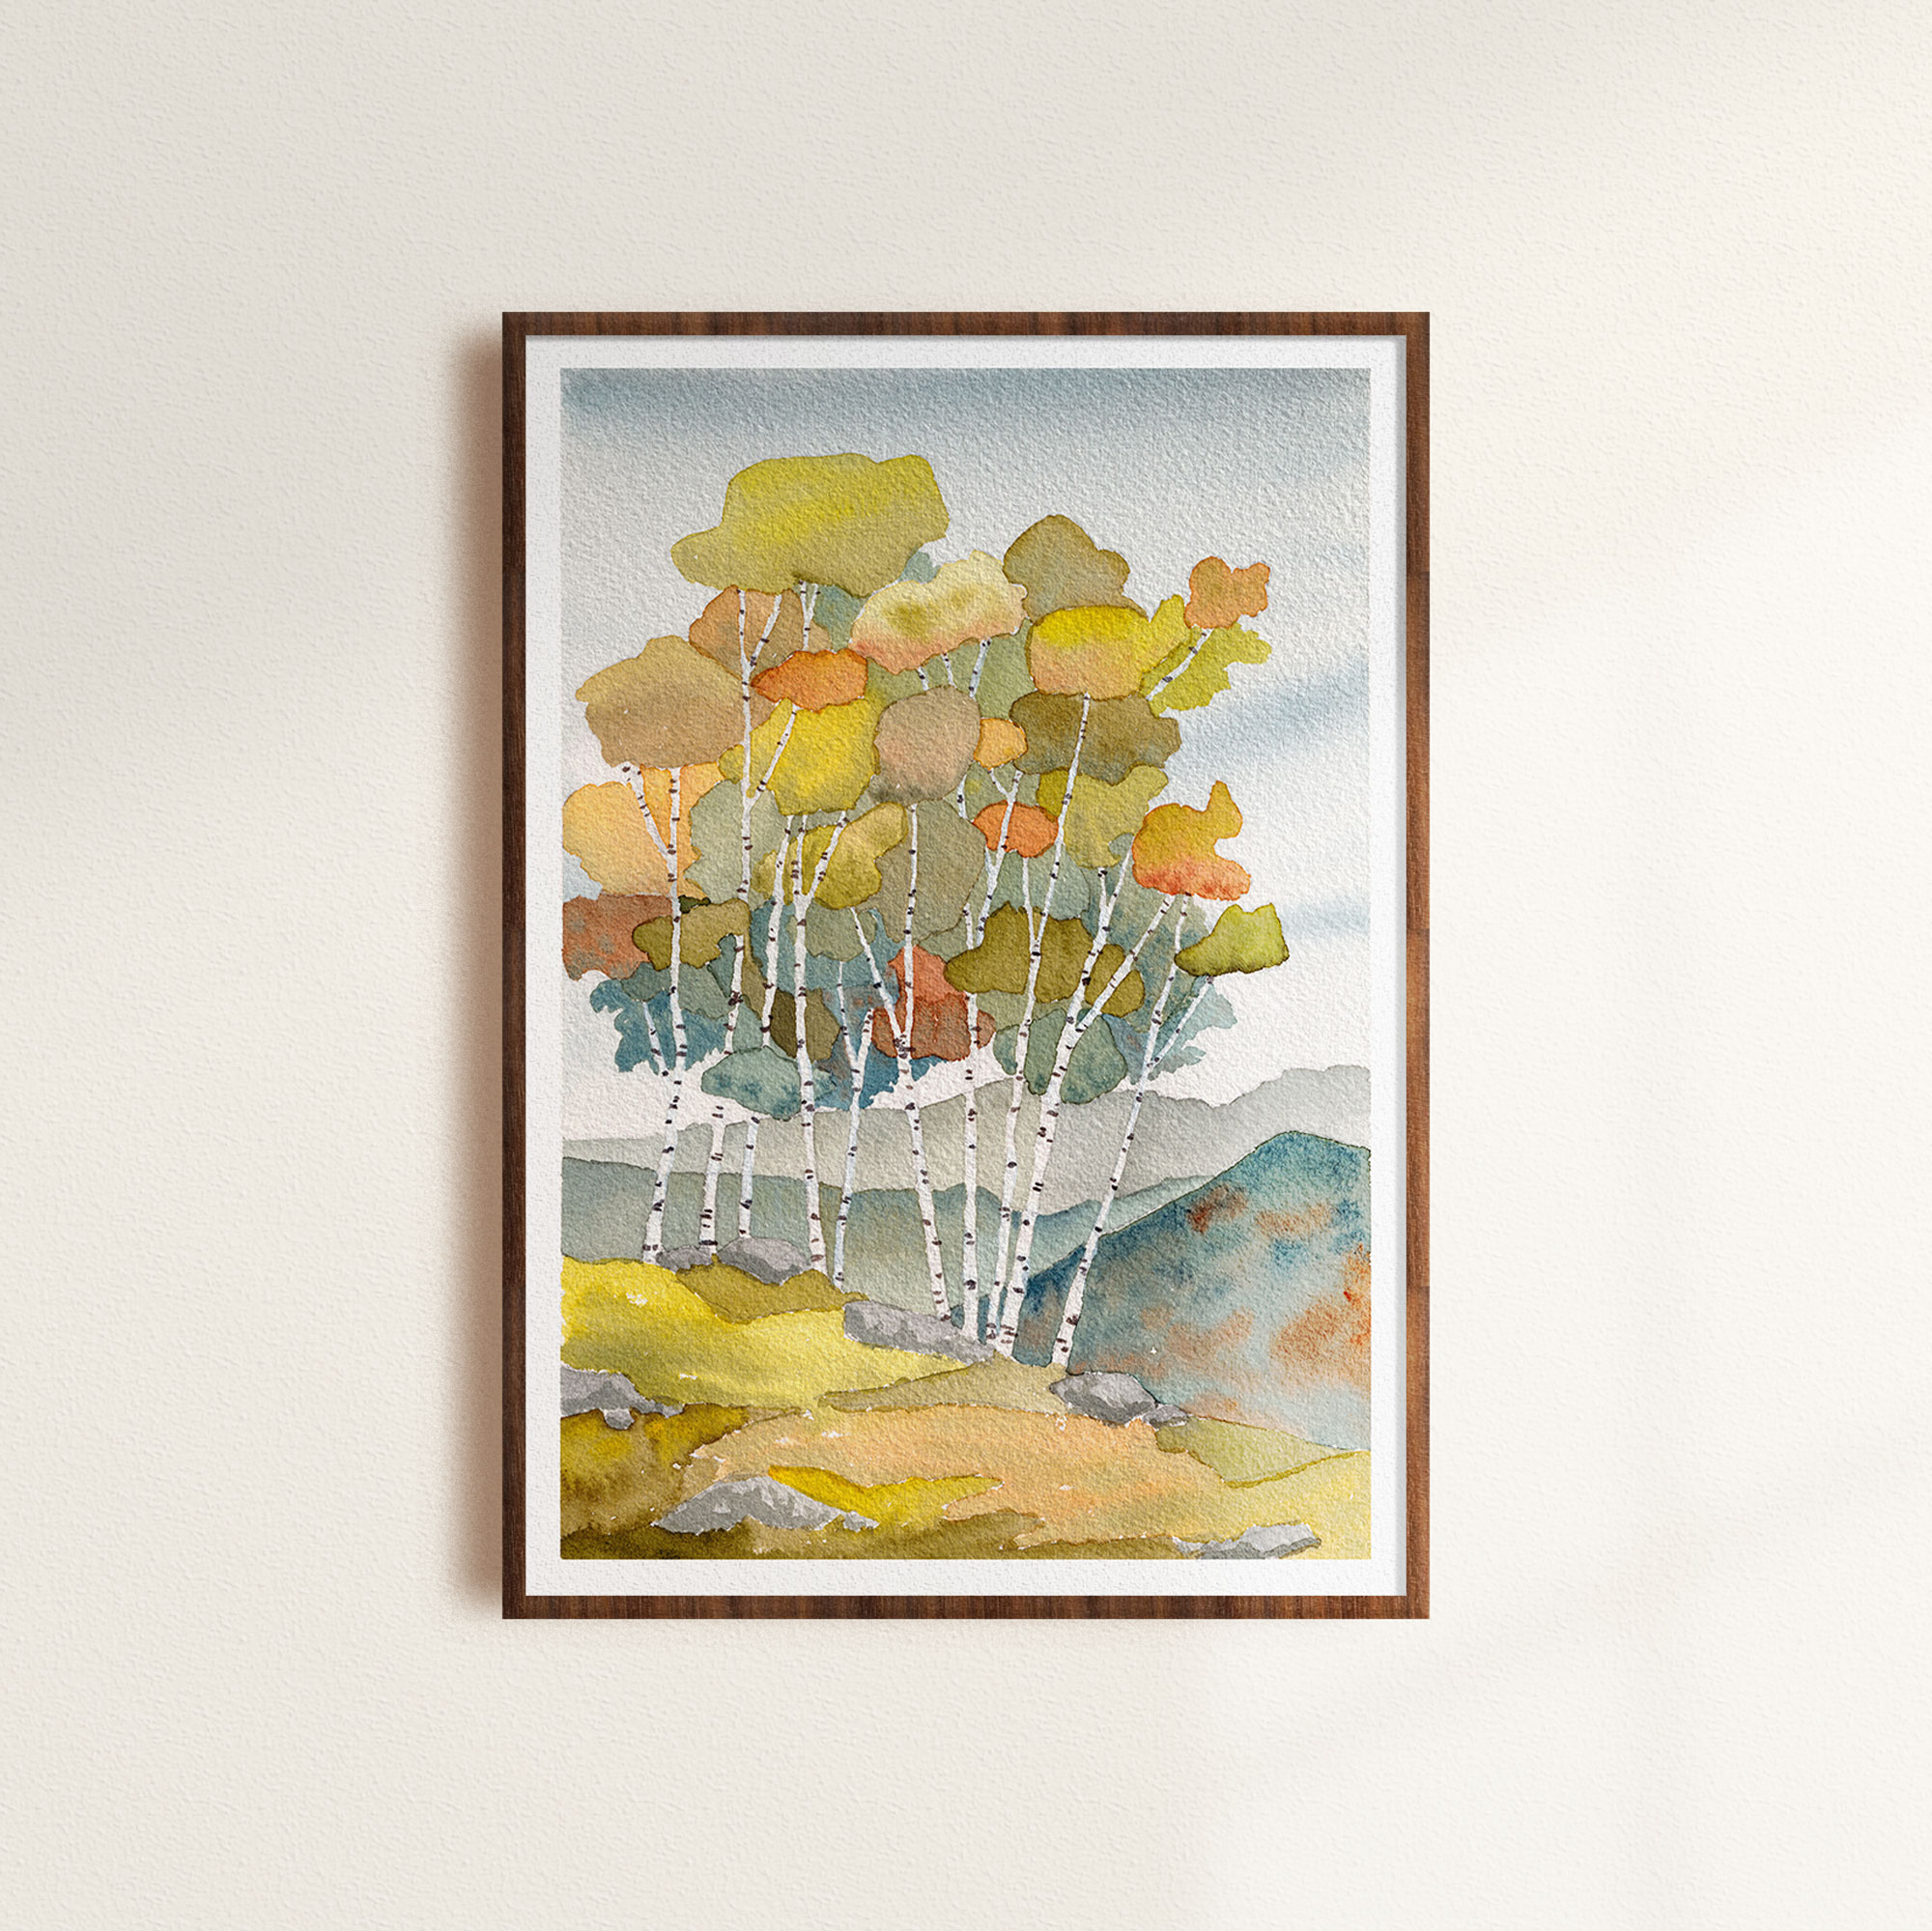 Silver Birch Landscape Painting in a Frame